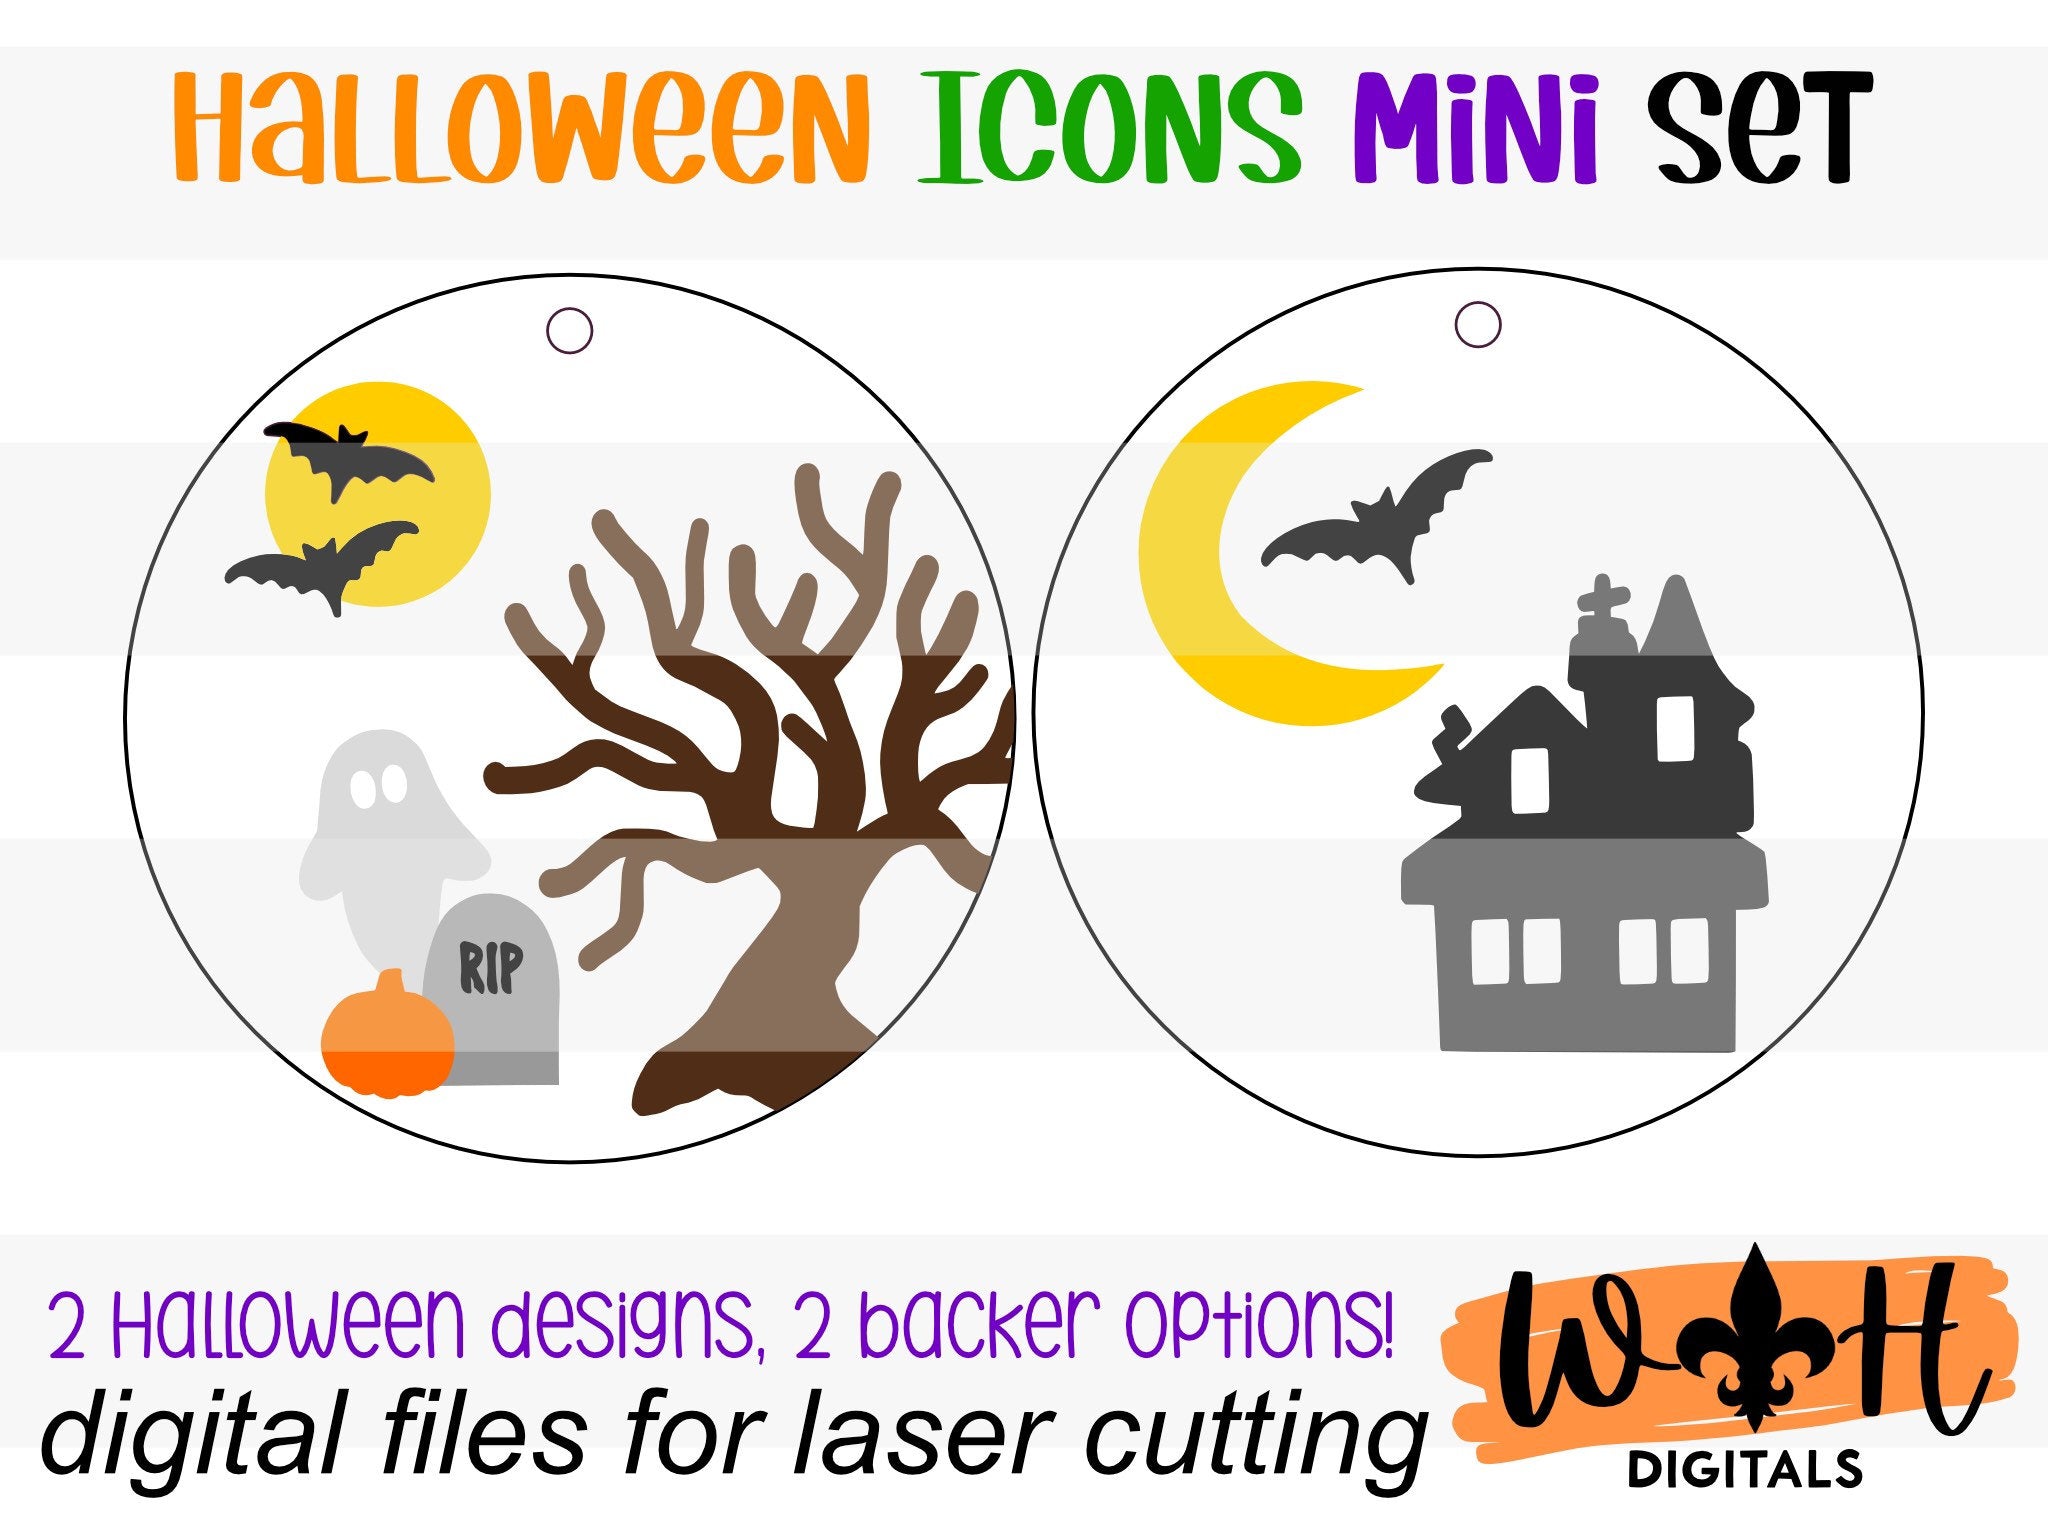 DIGITAL FILE - Halloween Icons - Haunted House - Shiplap Style Doodle Ornaments - SVG Cut File For Glowforge - Cut Files For Lasers